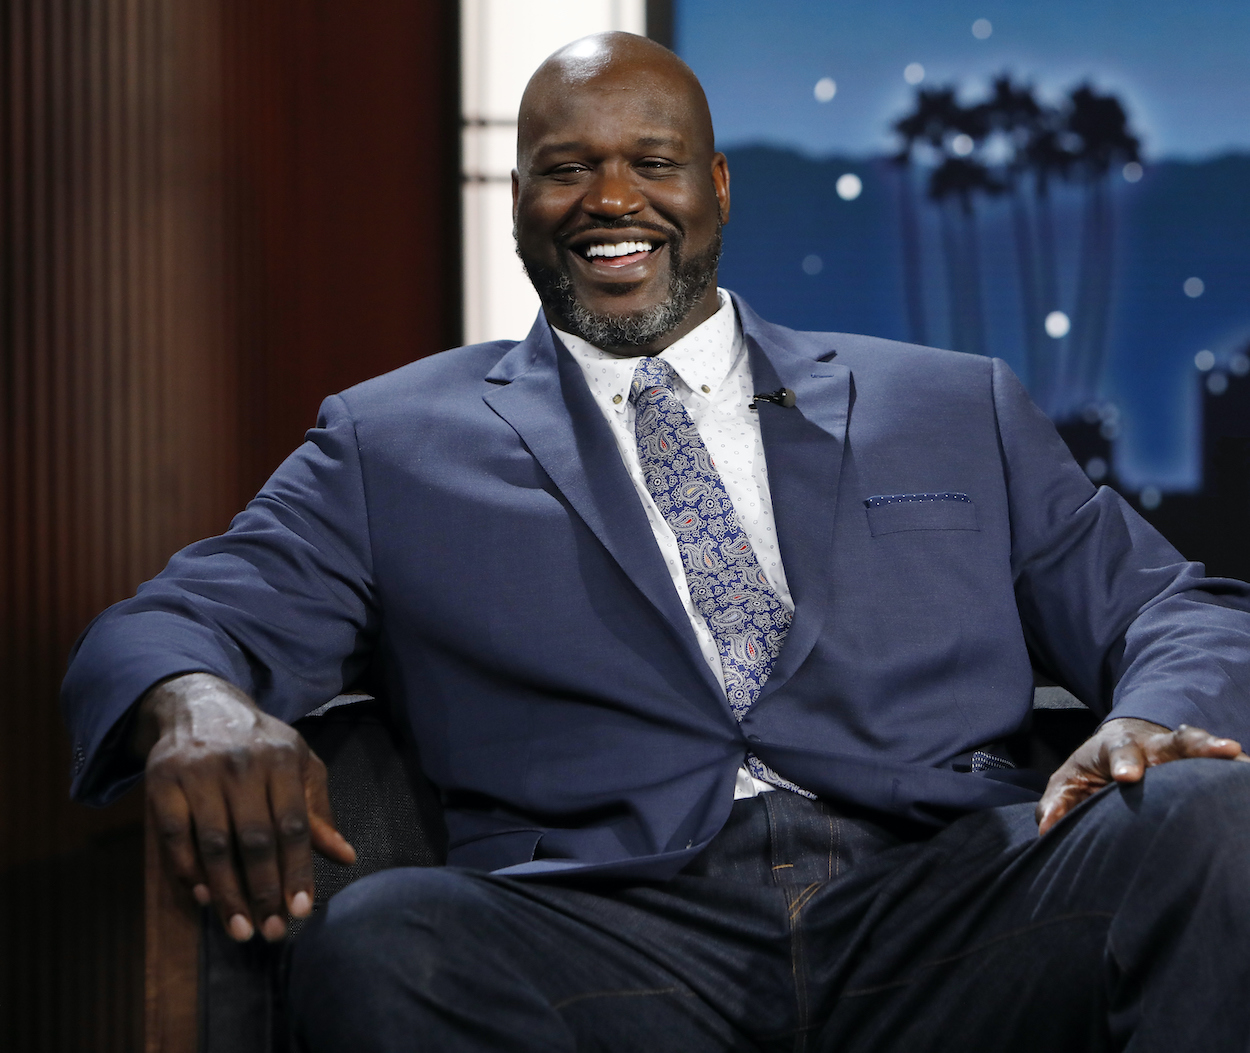 Shaquille O'Neal once bought a house he didn't like because his celebrity crush lived across the street.